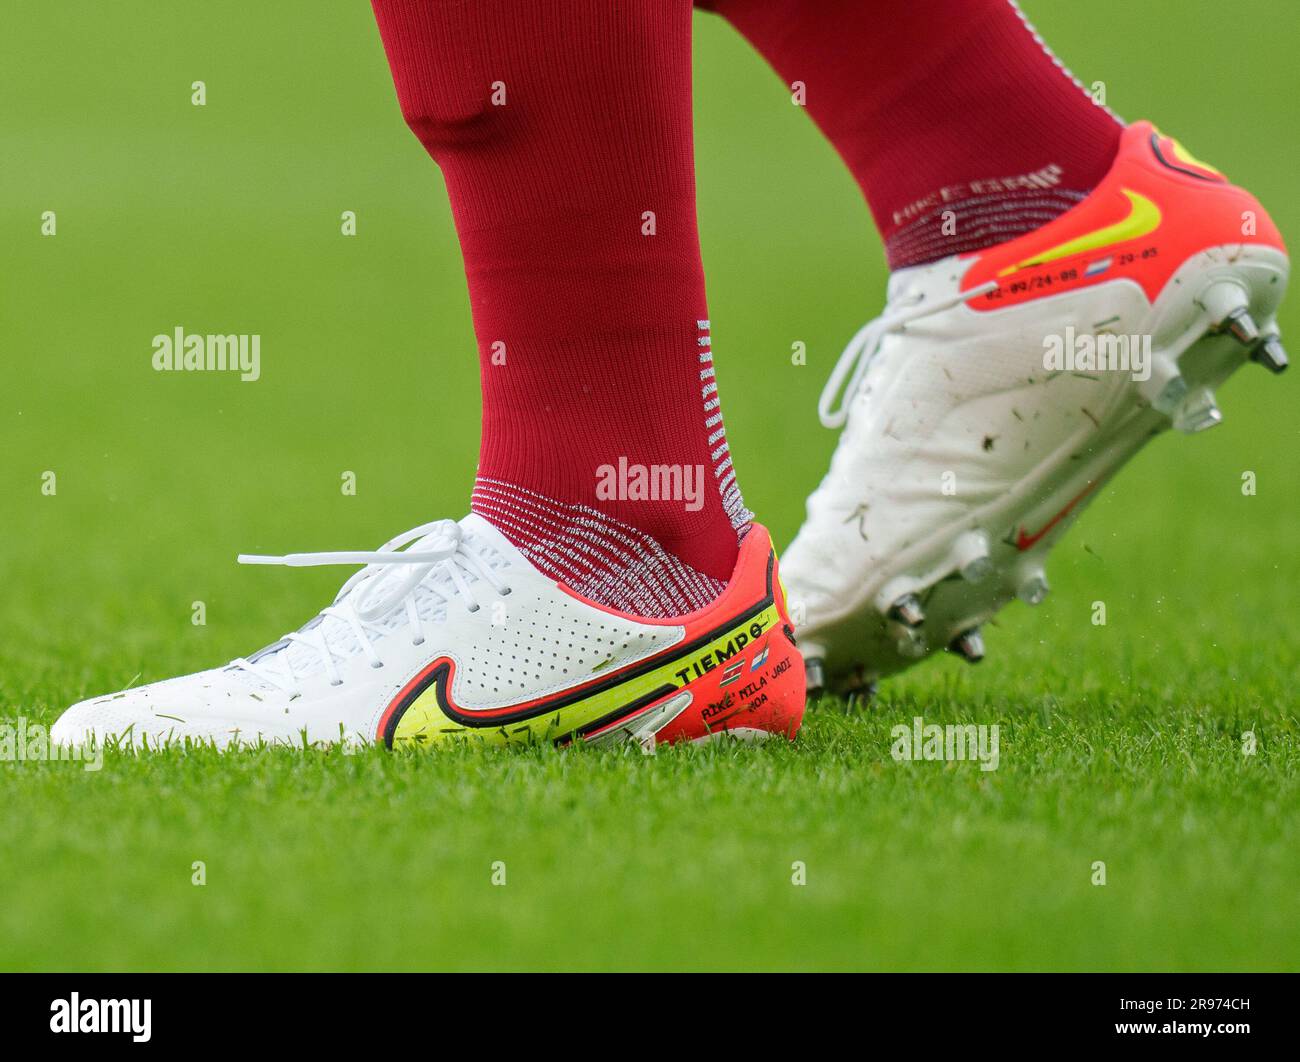 The Nike football boots of Virgil van Dijk of Liverpool during the Premier  League match between Norwich City and Liverpool at Carrow Road, Norwich, En  Stock Photo - Alamy